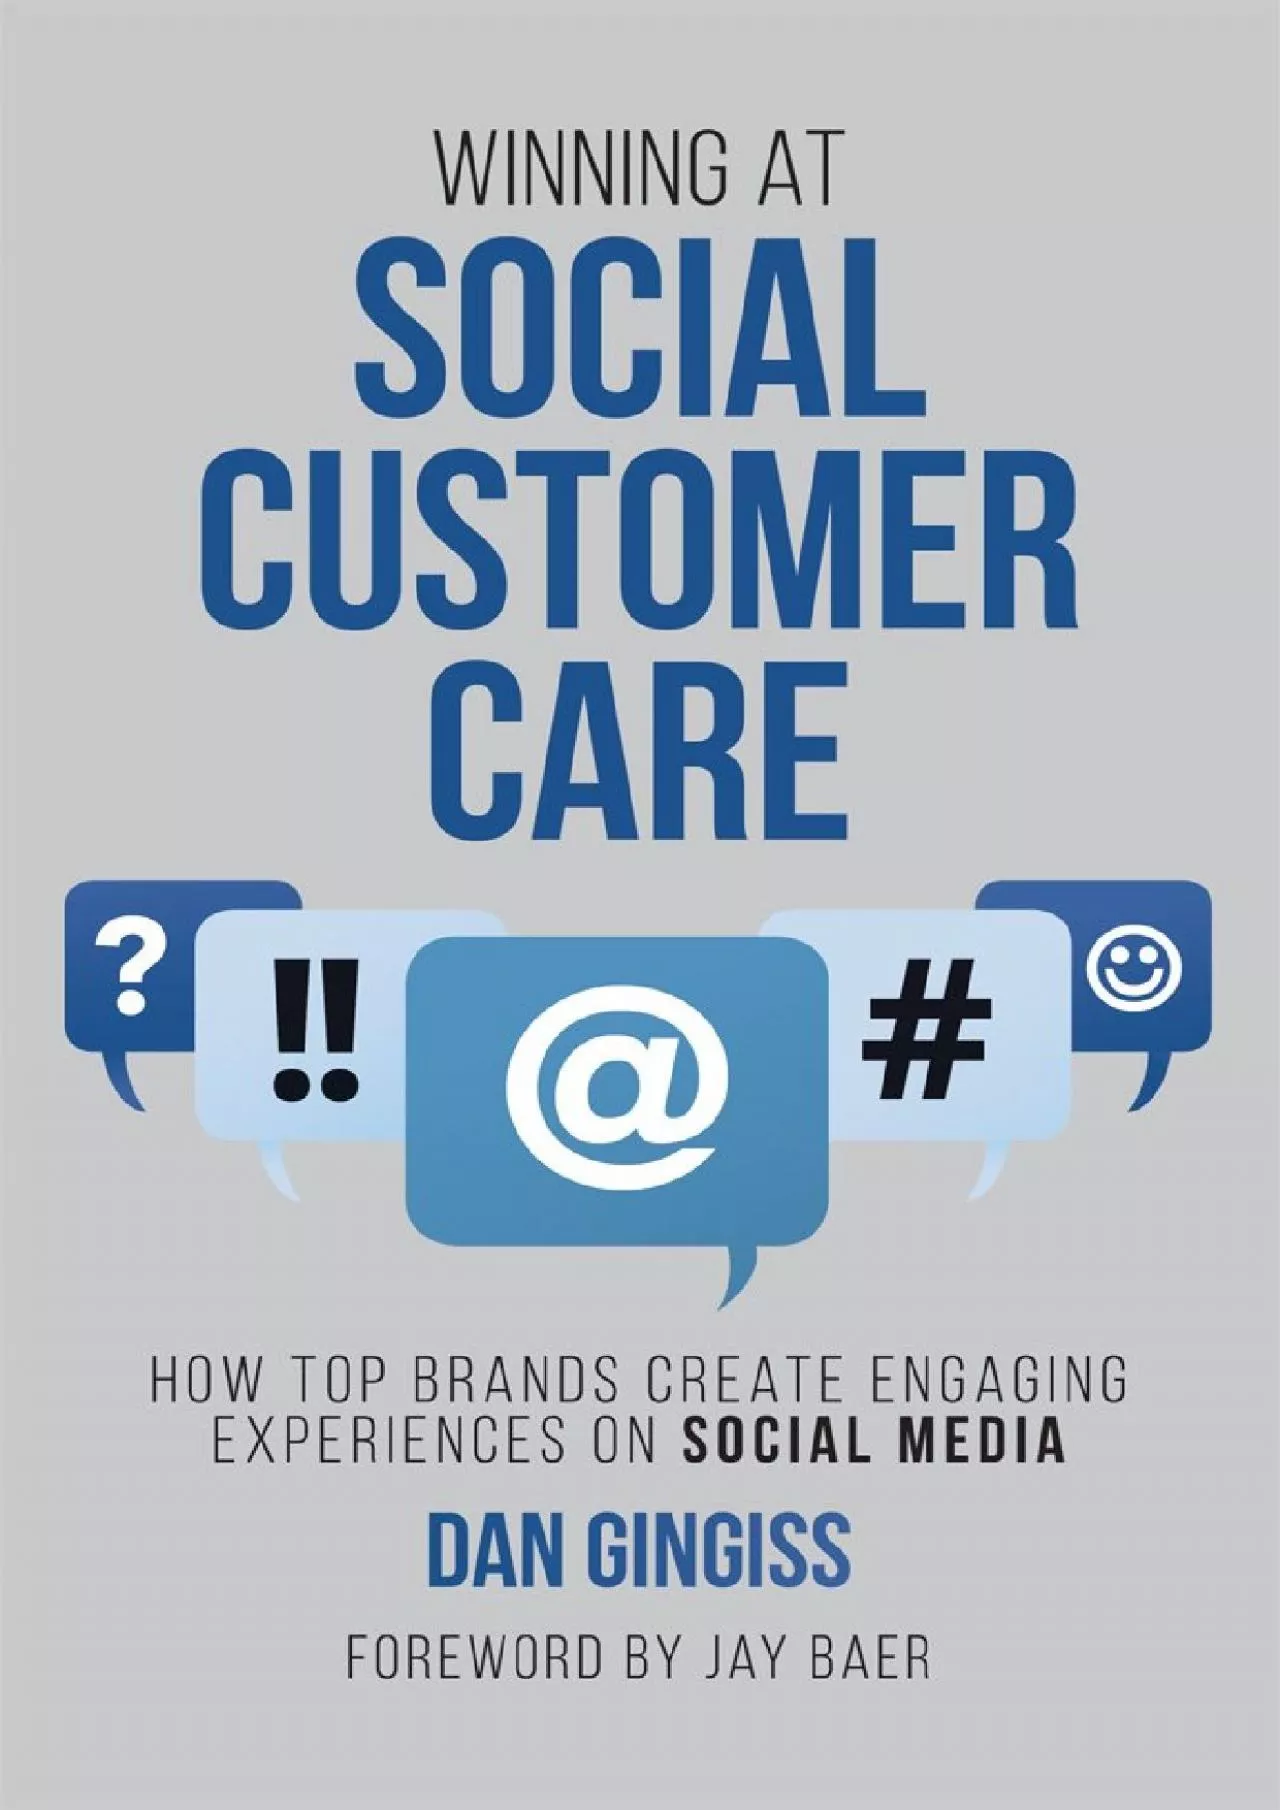 Winning at Social Customer Care: How Top Brands Create Engaging Experiences on Social